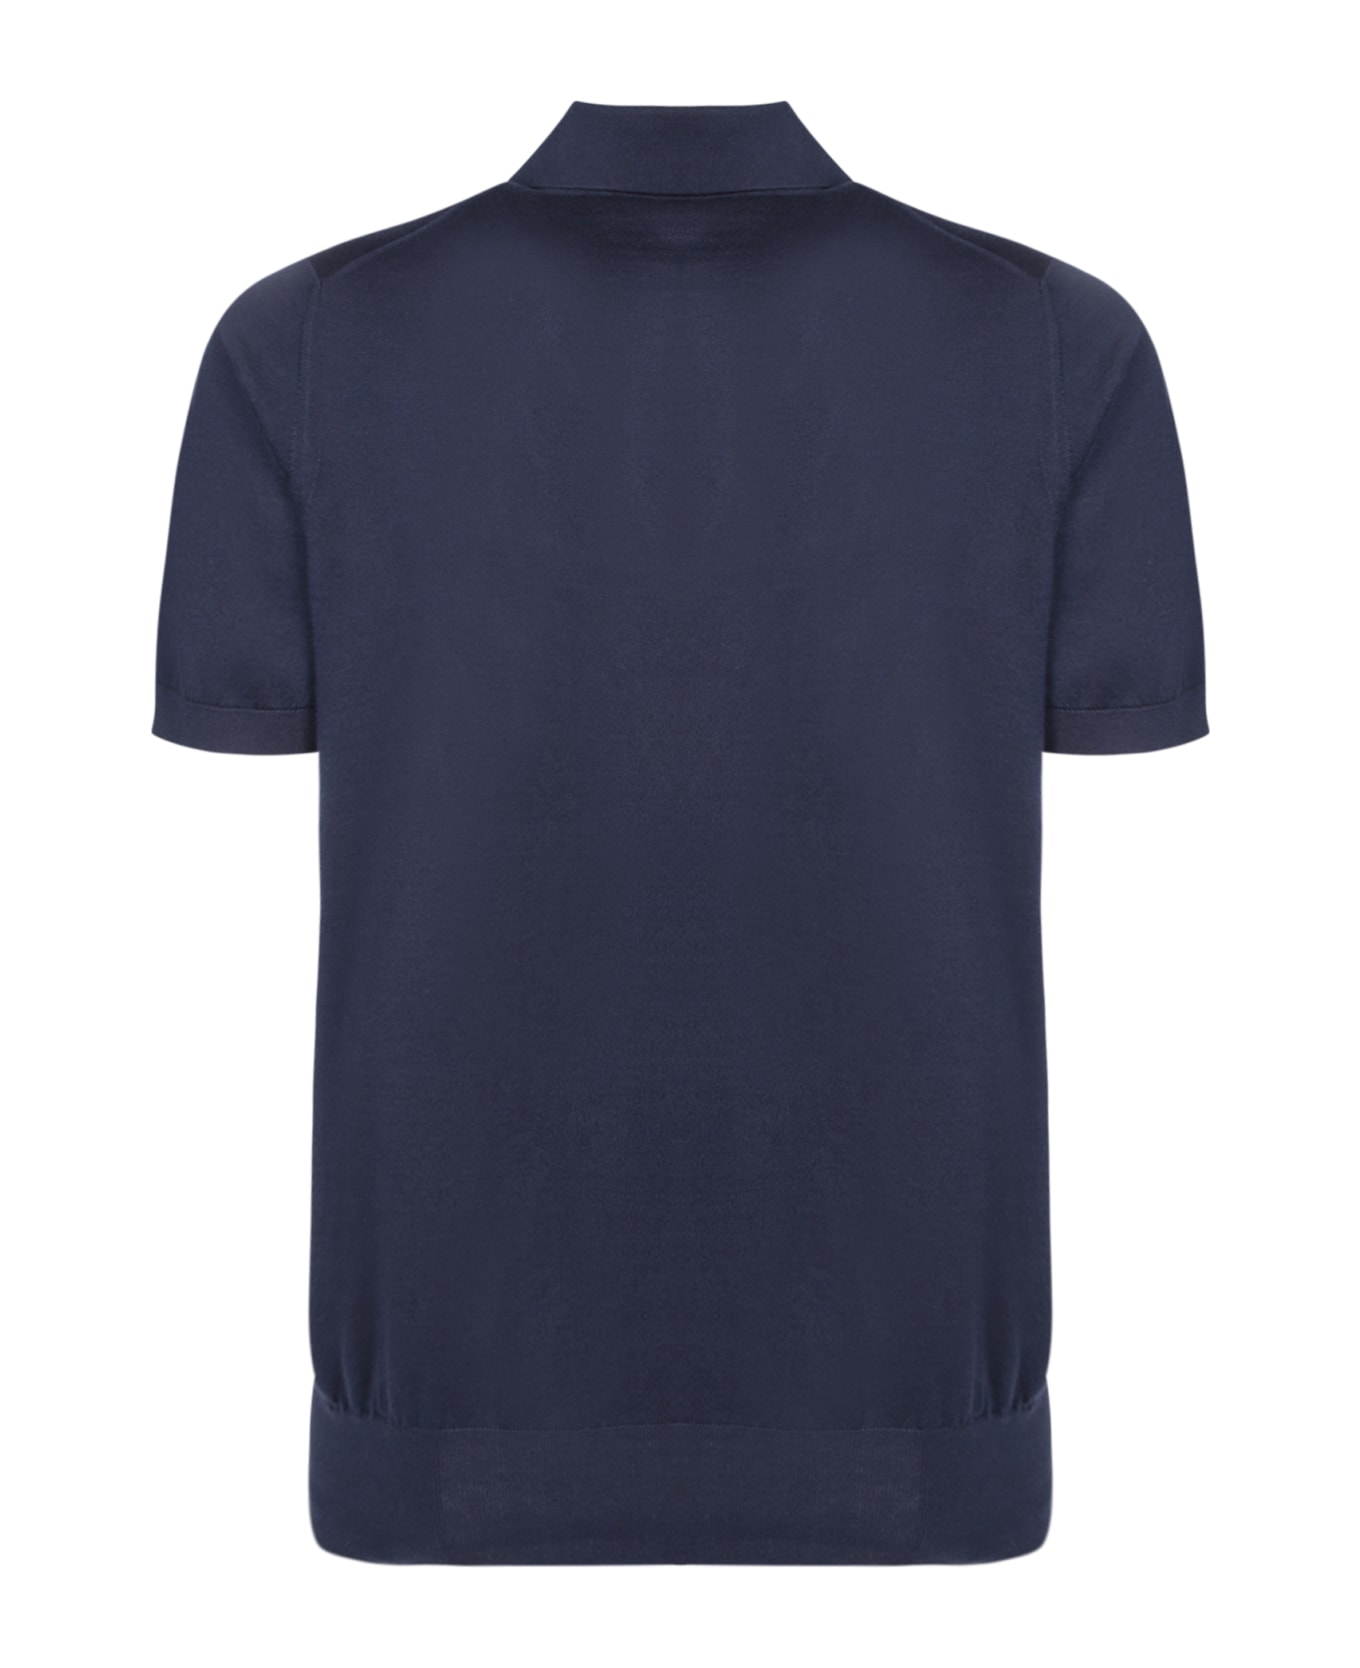 Brunello Cucinelli Short Sleeves Blue Polo Shirt - Navy ポロシャツ